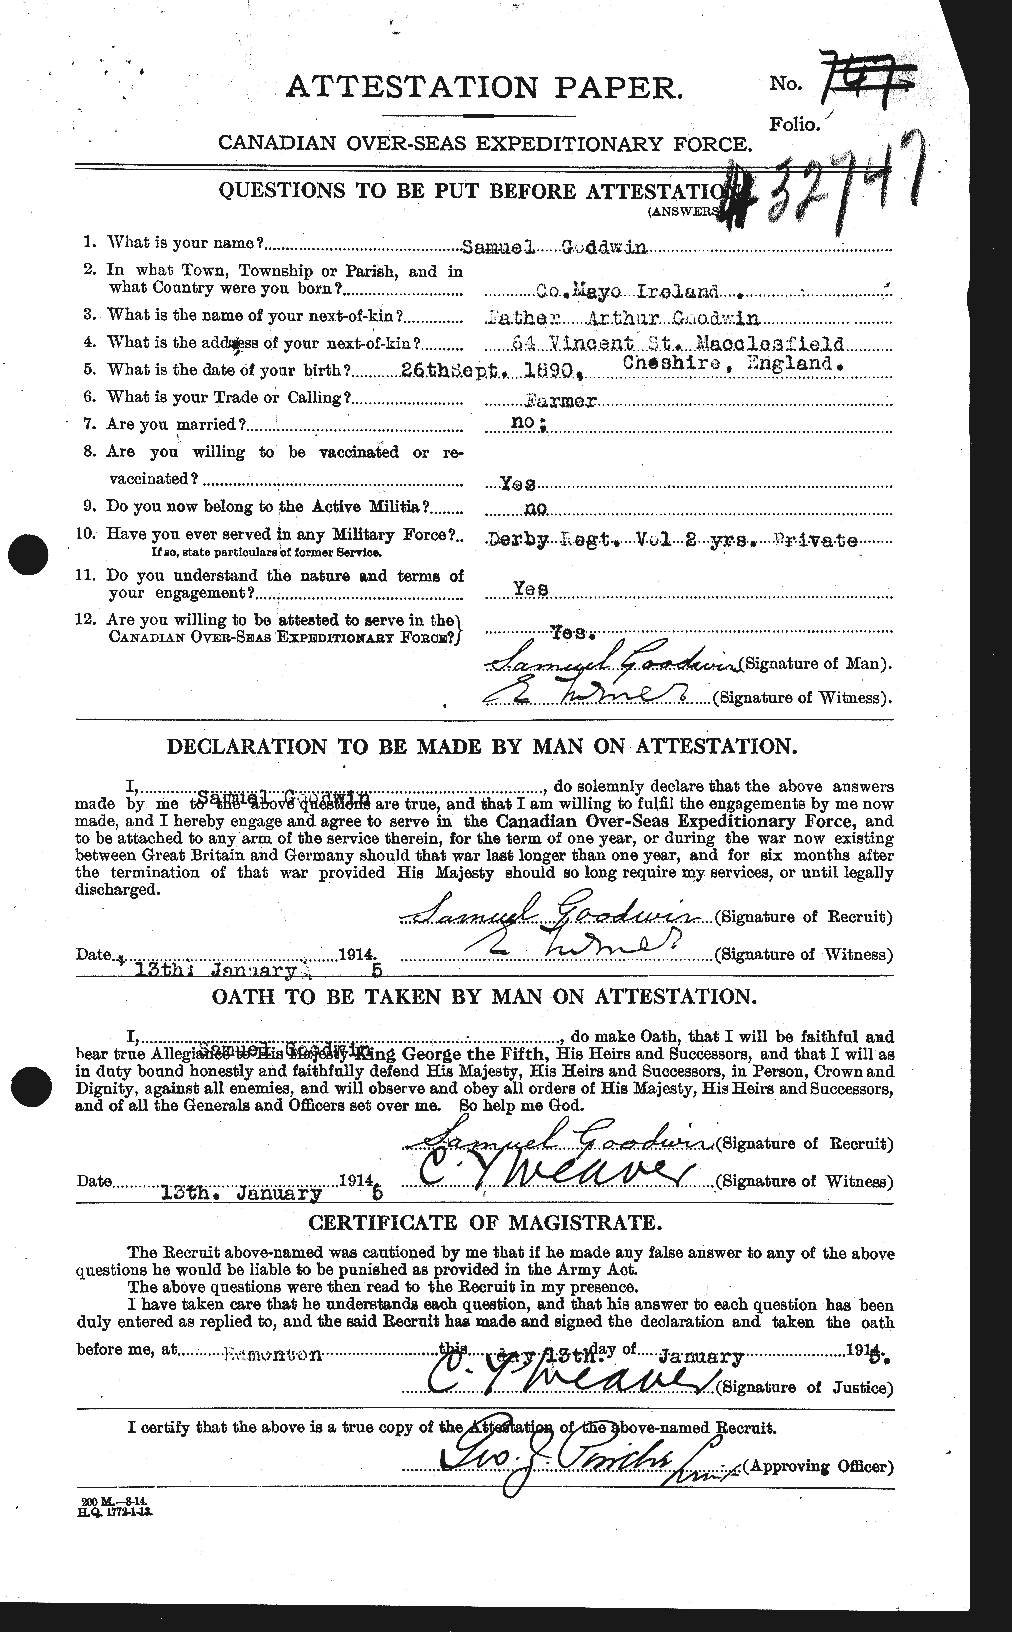 Personnel Records of the First World War - CEF 355241a